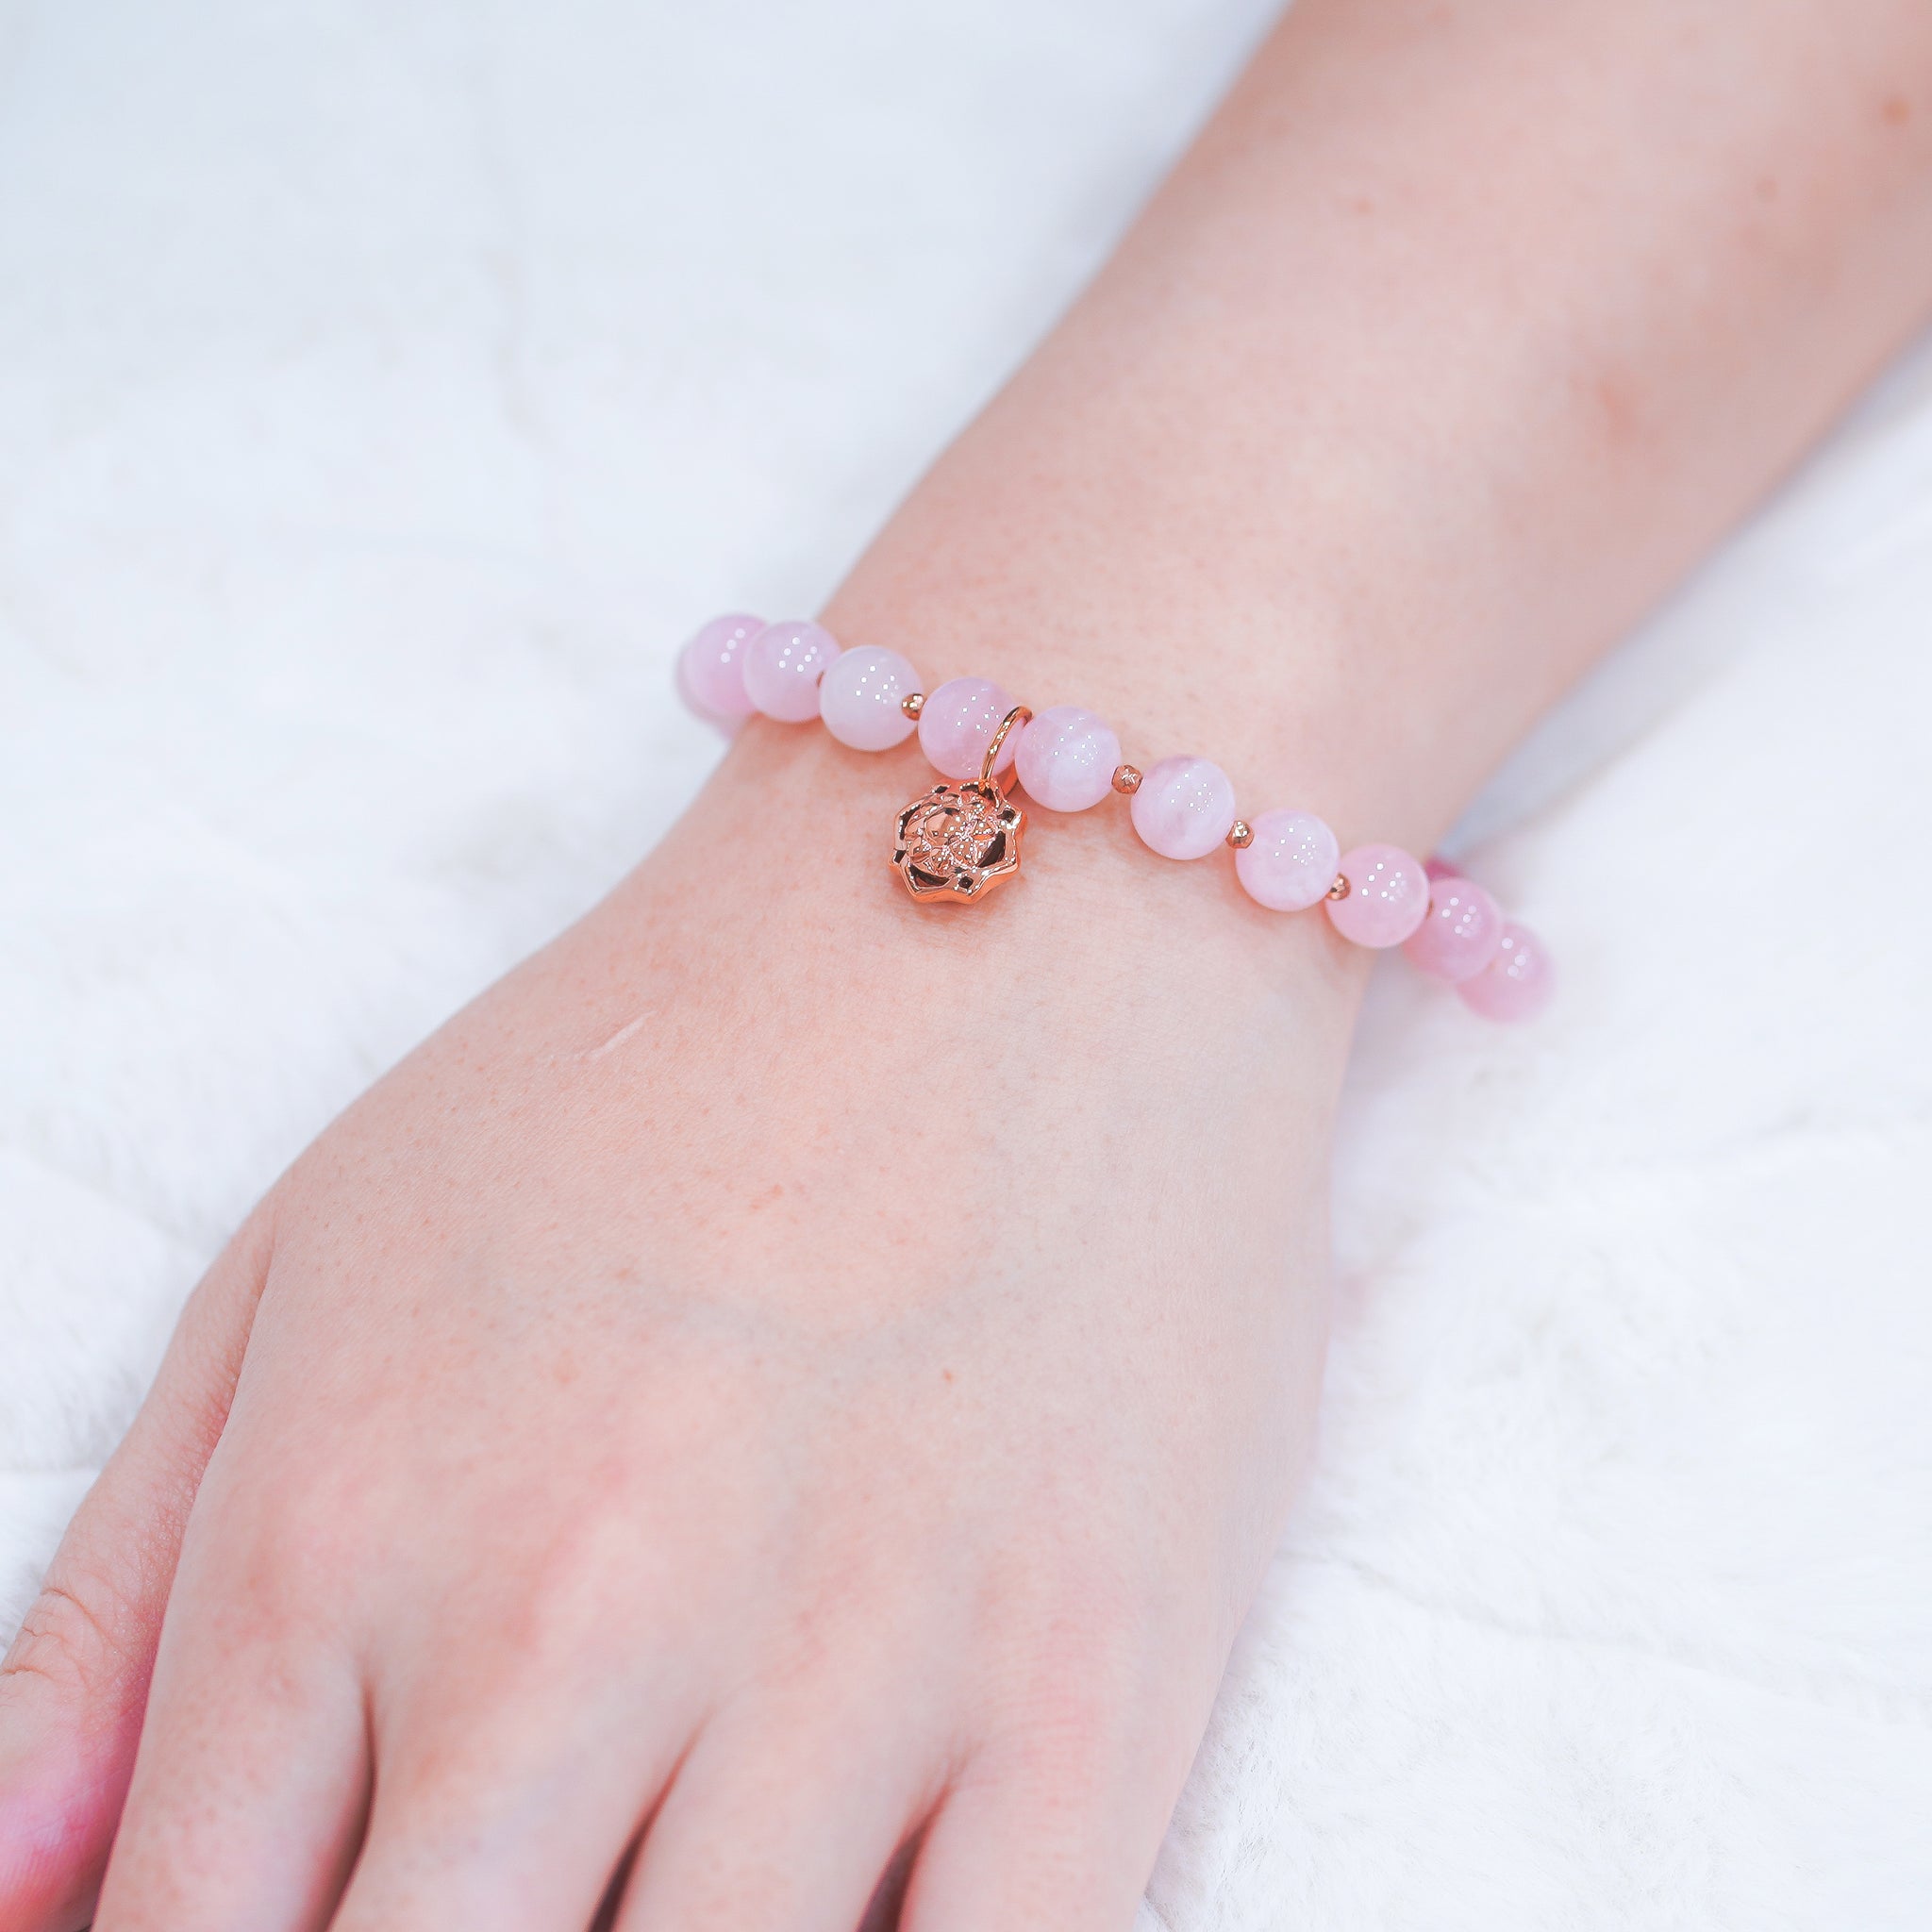 Garden of Desire - Embrace Rose Quartz Bracelet This easy-fit elastic stretch bracelet features our handcrafted 92.5 sterling silver emblem charm plated in rose gold, together with Rose Quartz and Hematite (plated in rose gold)